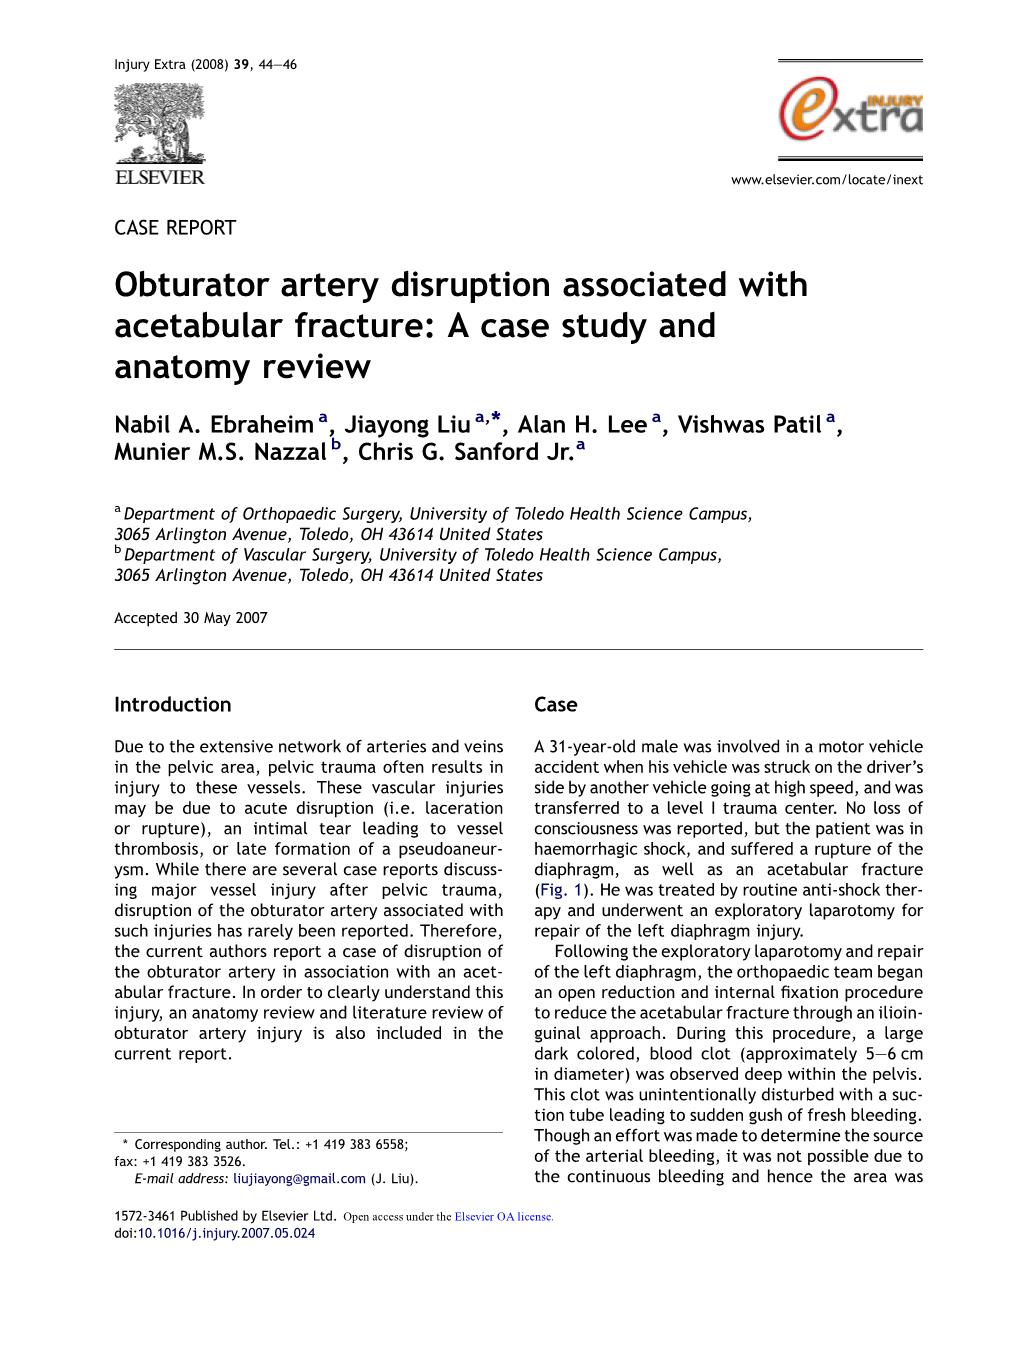 Obturator Artery Disruption Associated with Acetabular Fracture: a Case Study and Anatomy Review